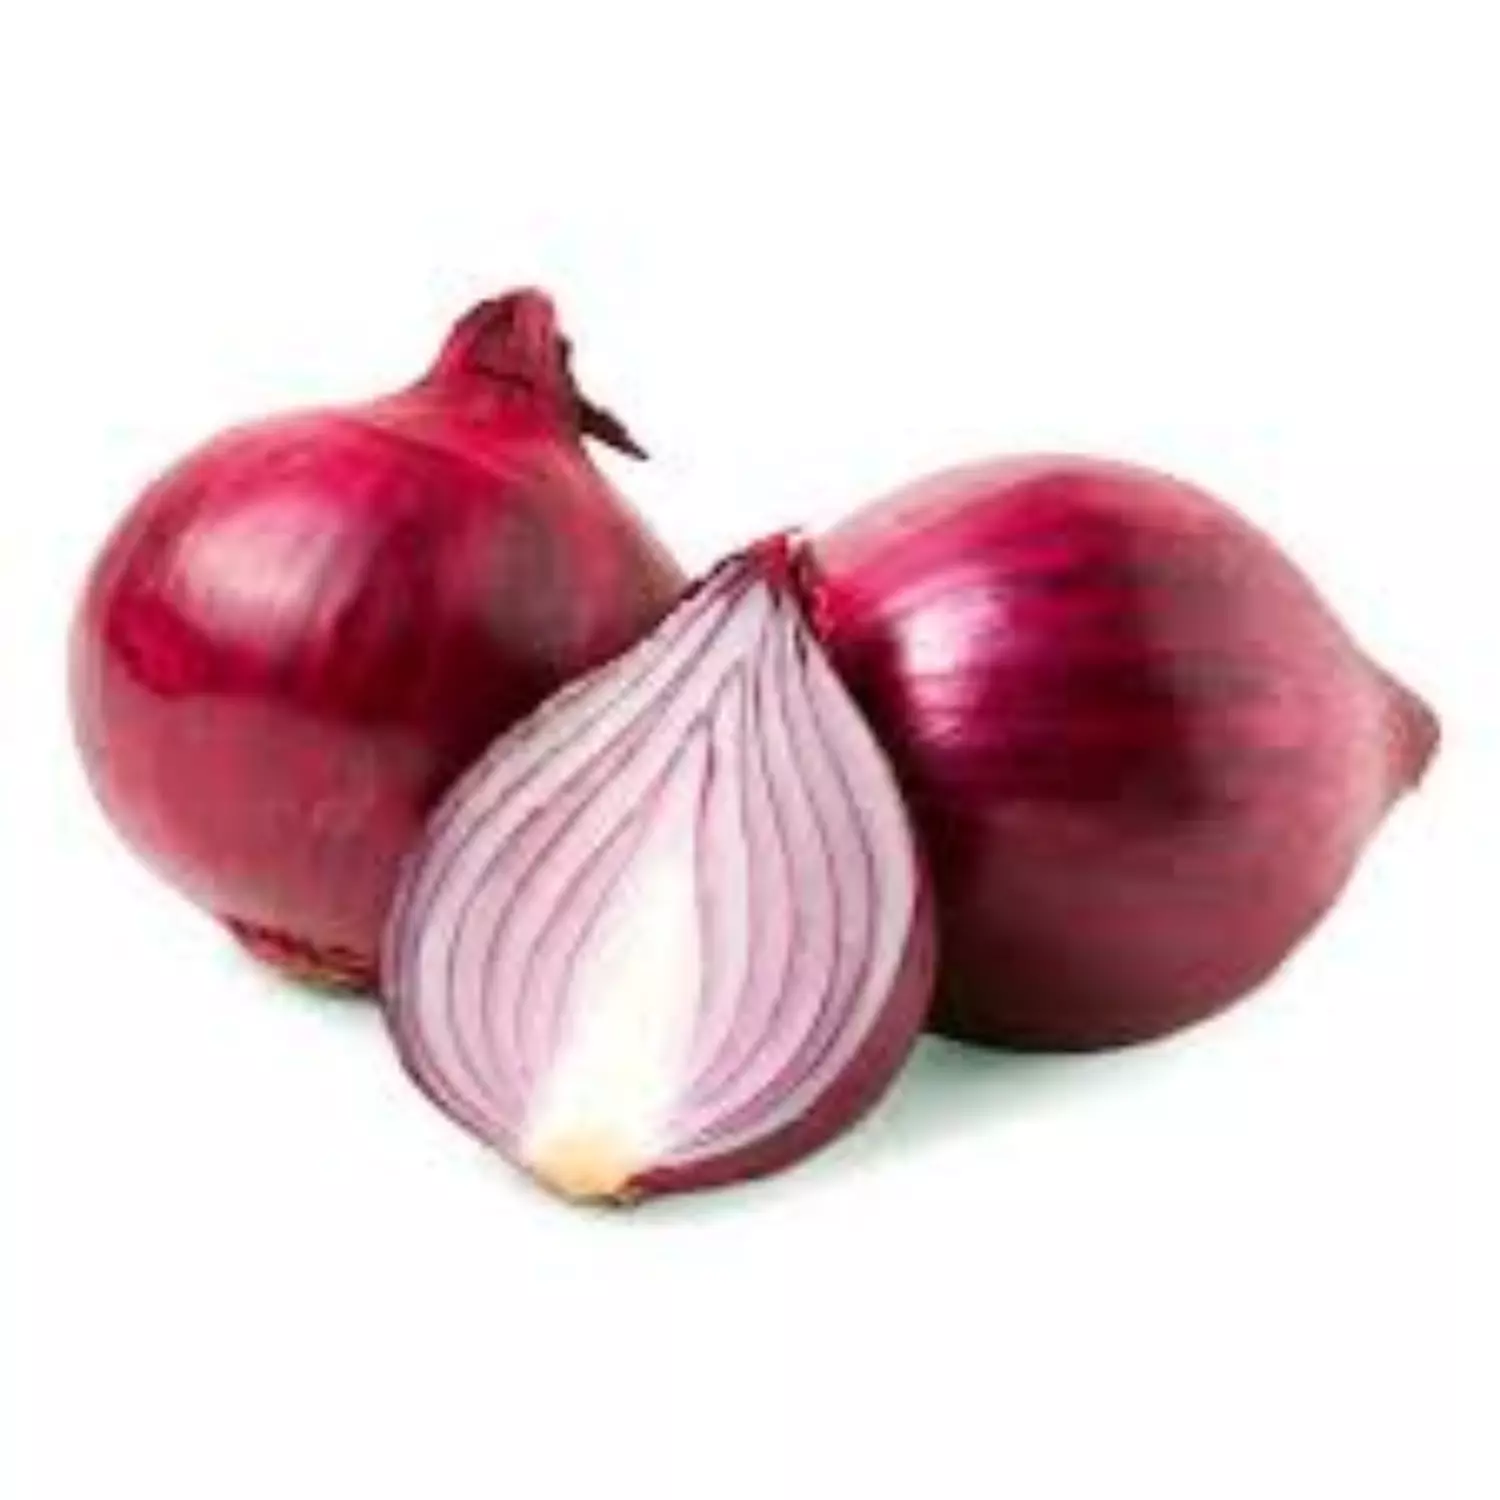  Organic Red Onion hover image